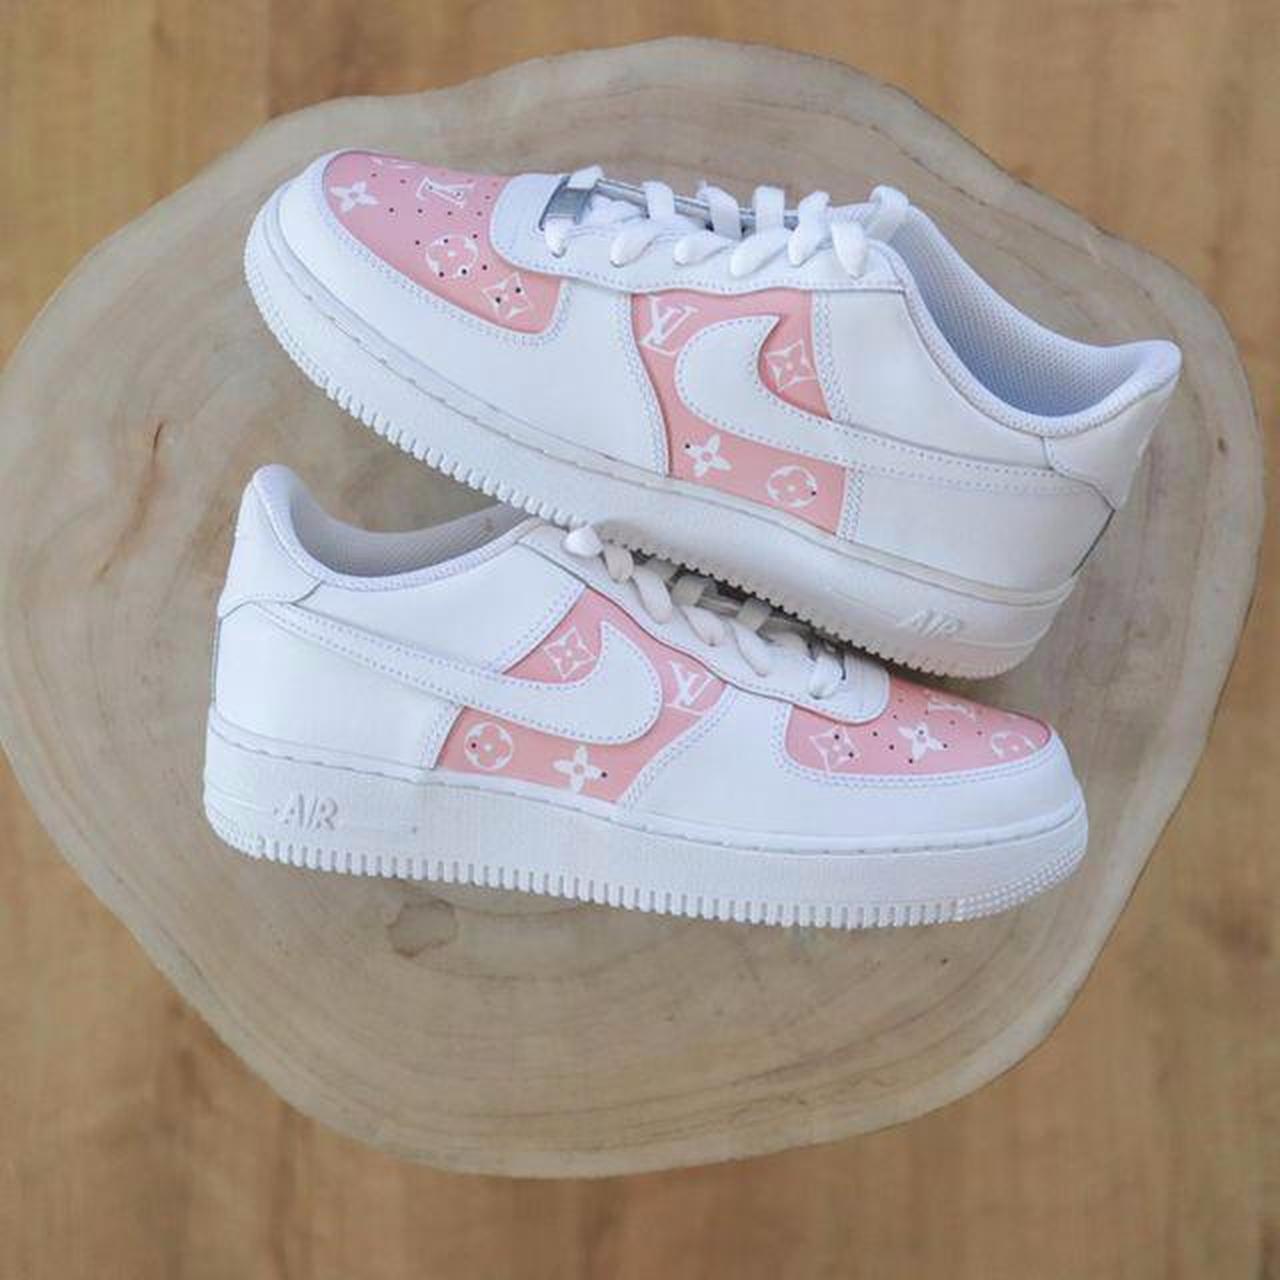 Air force 1 Louis Vuitton custom * NOT MY PICTURE - Depop